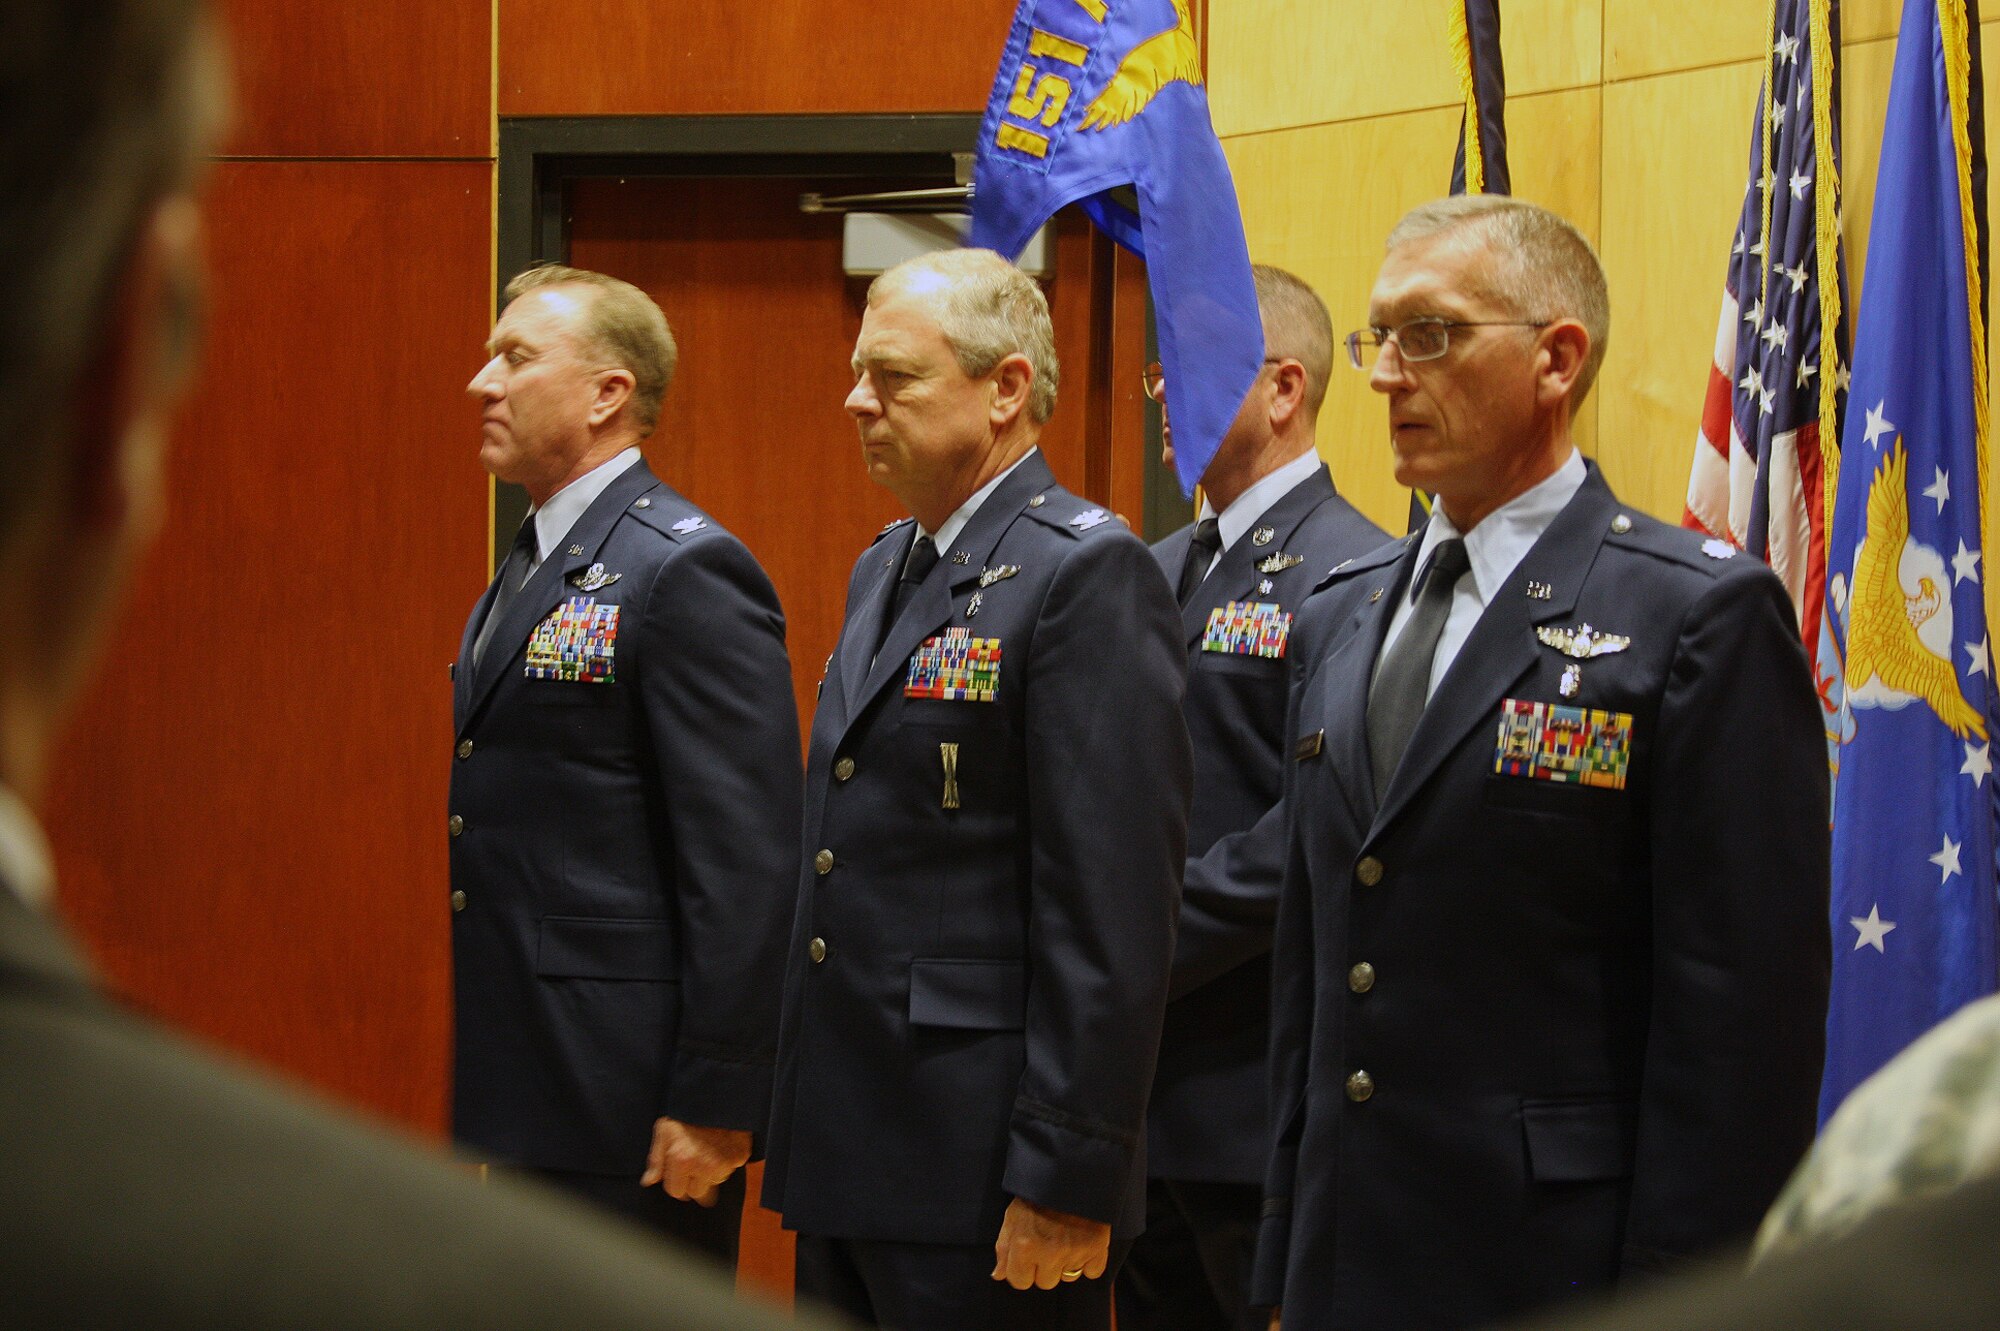 Col. Samuel Ramsay, Col. Paul Byrd and Lt. Col. Kevin Windsor stand at attention during a change-of-command ceremony at the Utah Air National Guard base Dec. 2. During the ceremony officiated by Ramsay, the wing commander, Byrd relinquished command of the 151st Medical Group and Windsor assumed command. (U.S. Air Force photo courtesy of Dee Brady)(RELEASED)